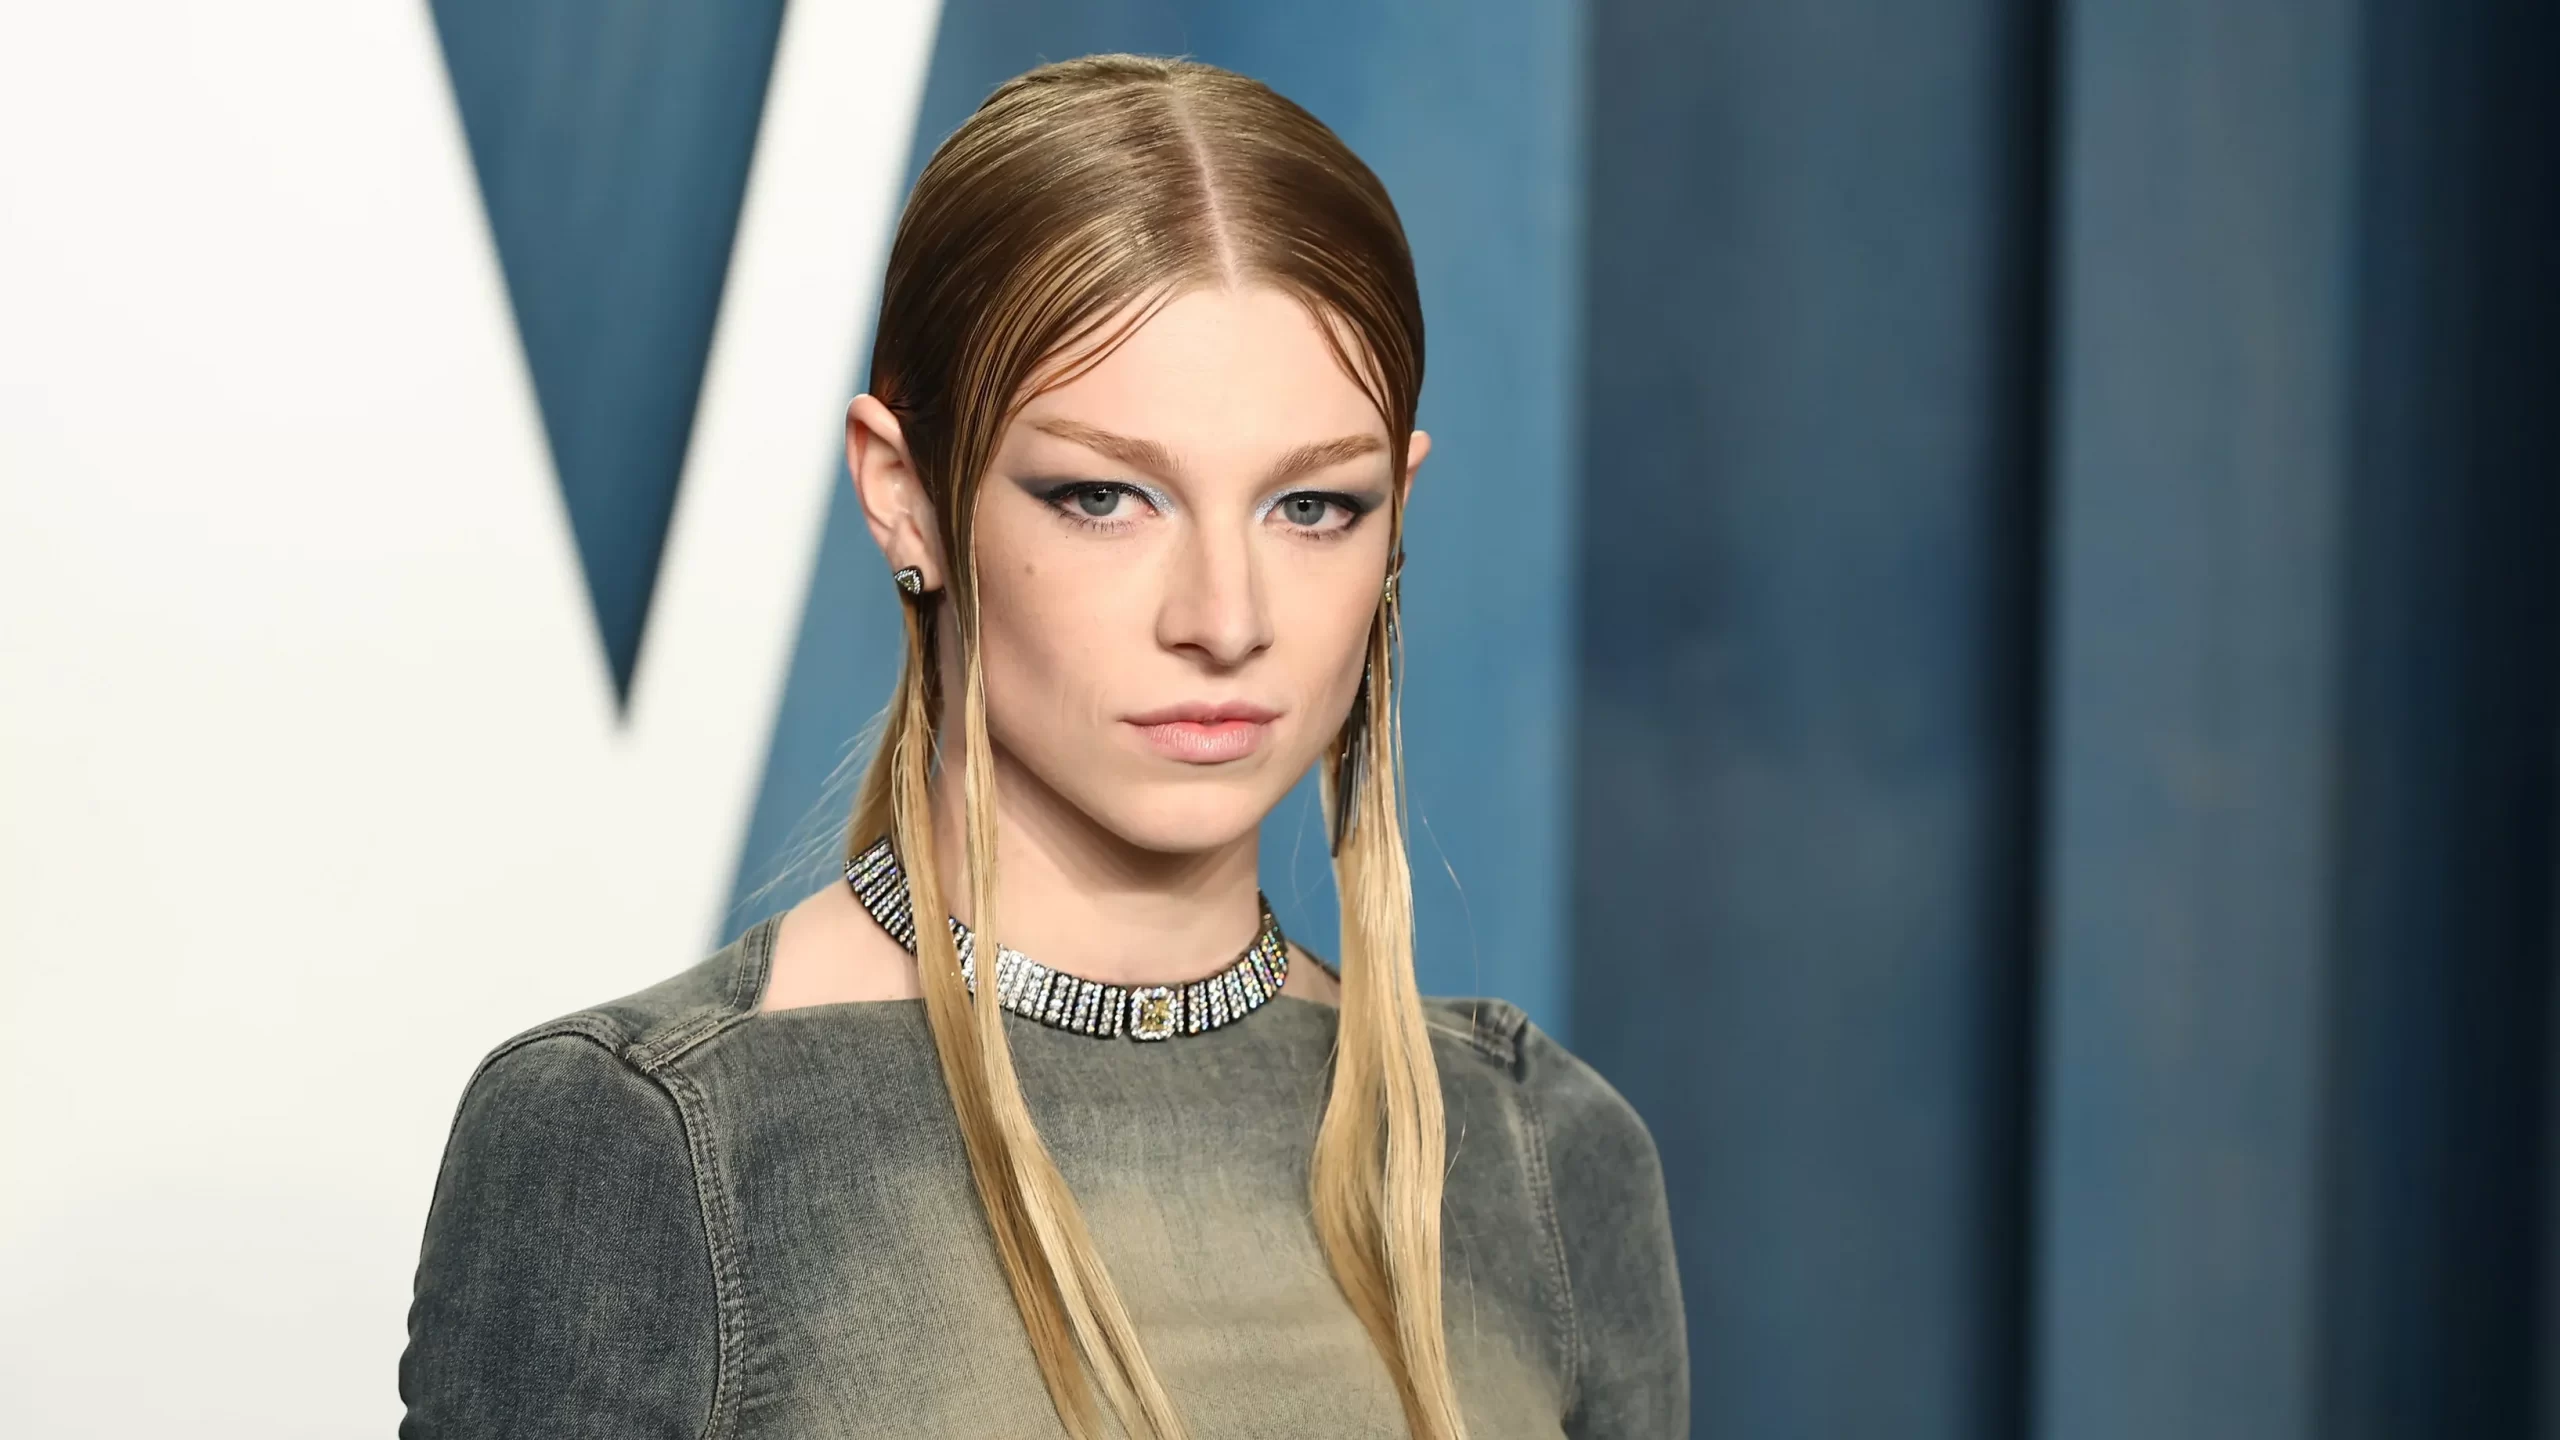 What was the controversy that made fans upset with Hunter Schafer